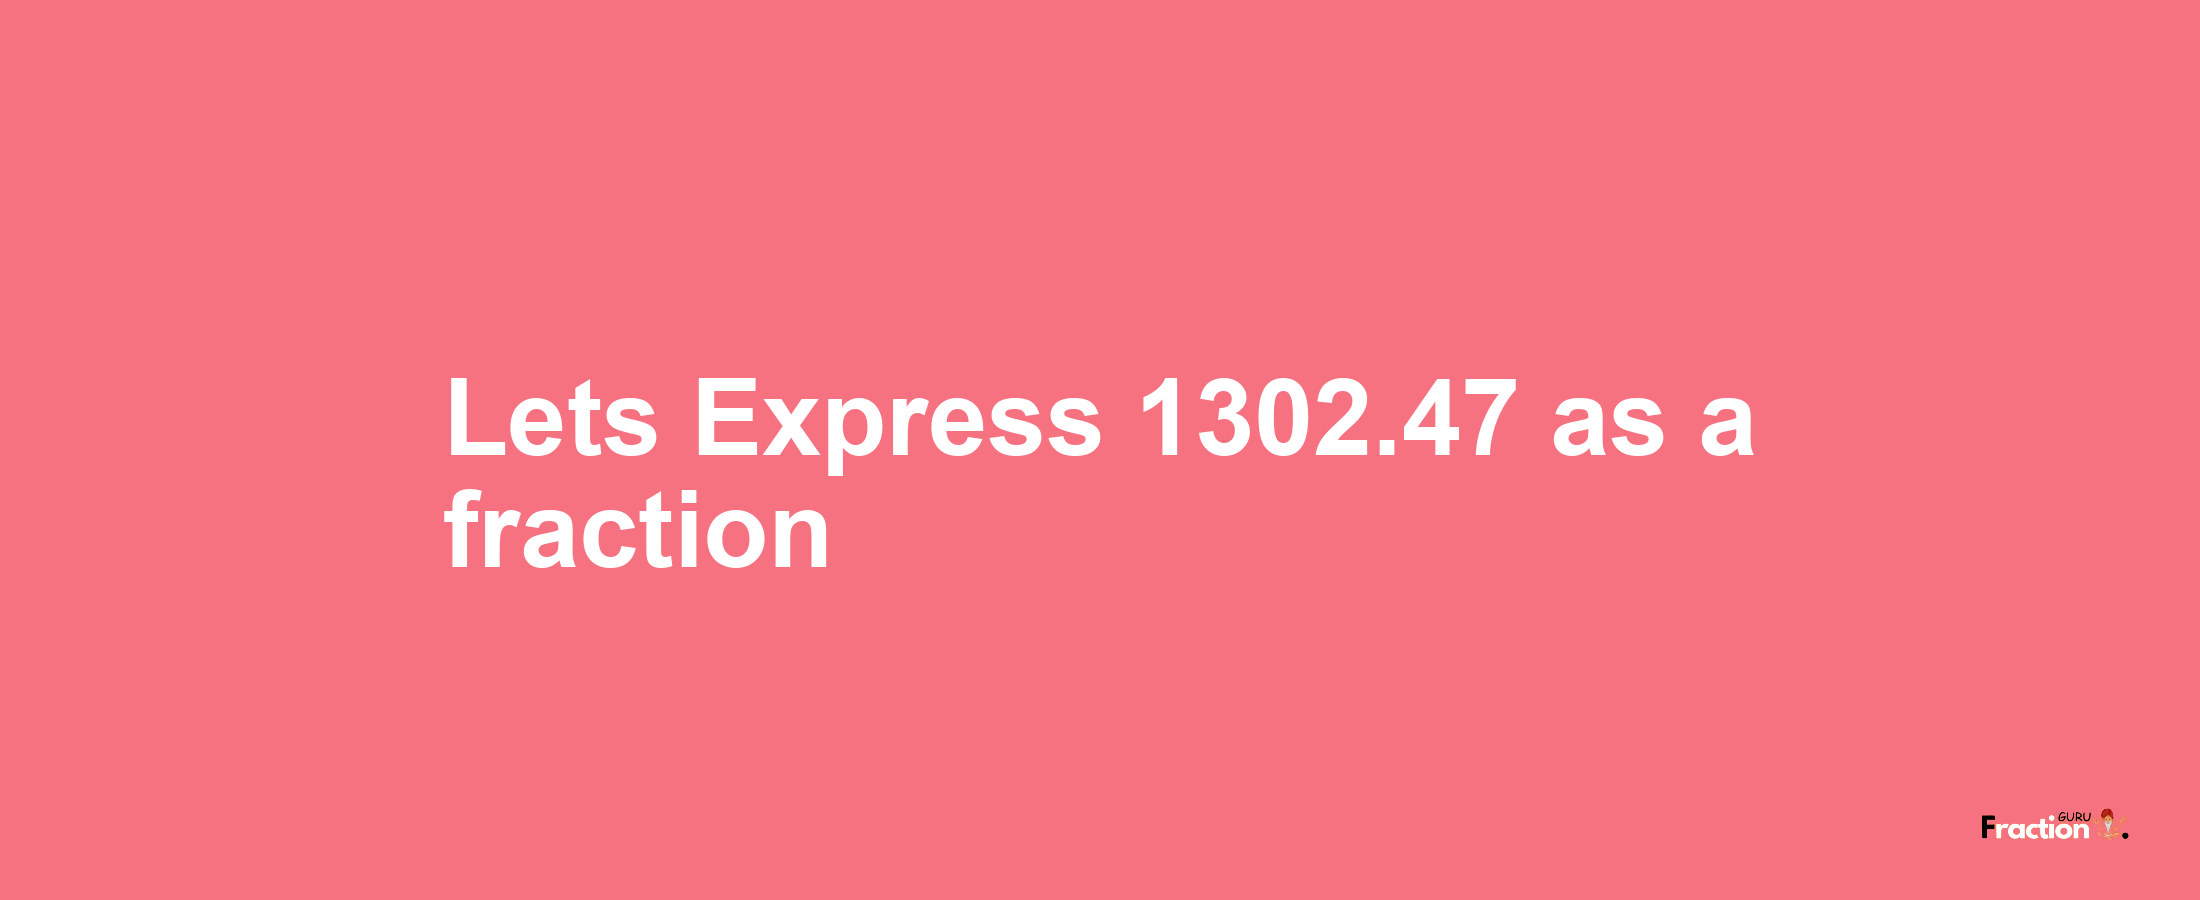 Lets Express 1302.47 as afraction